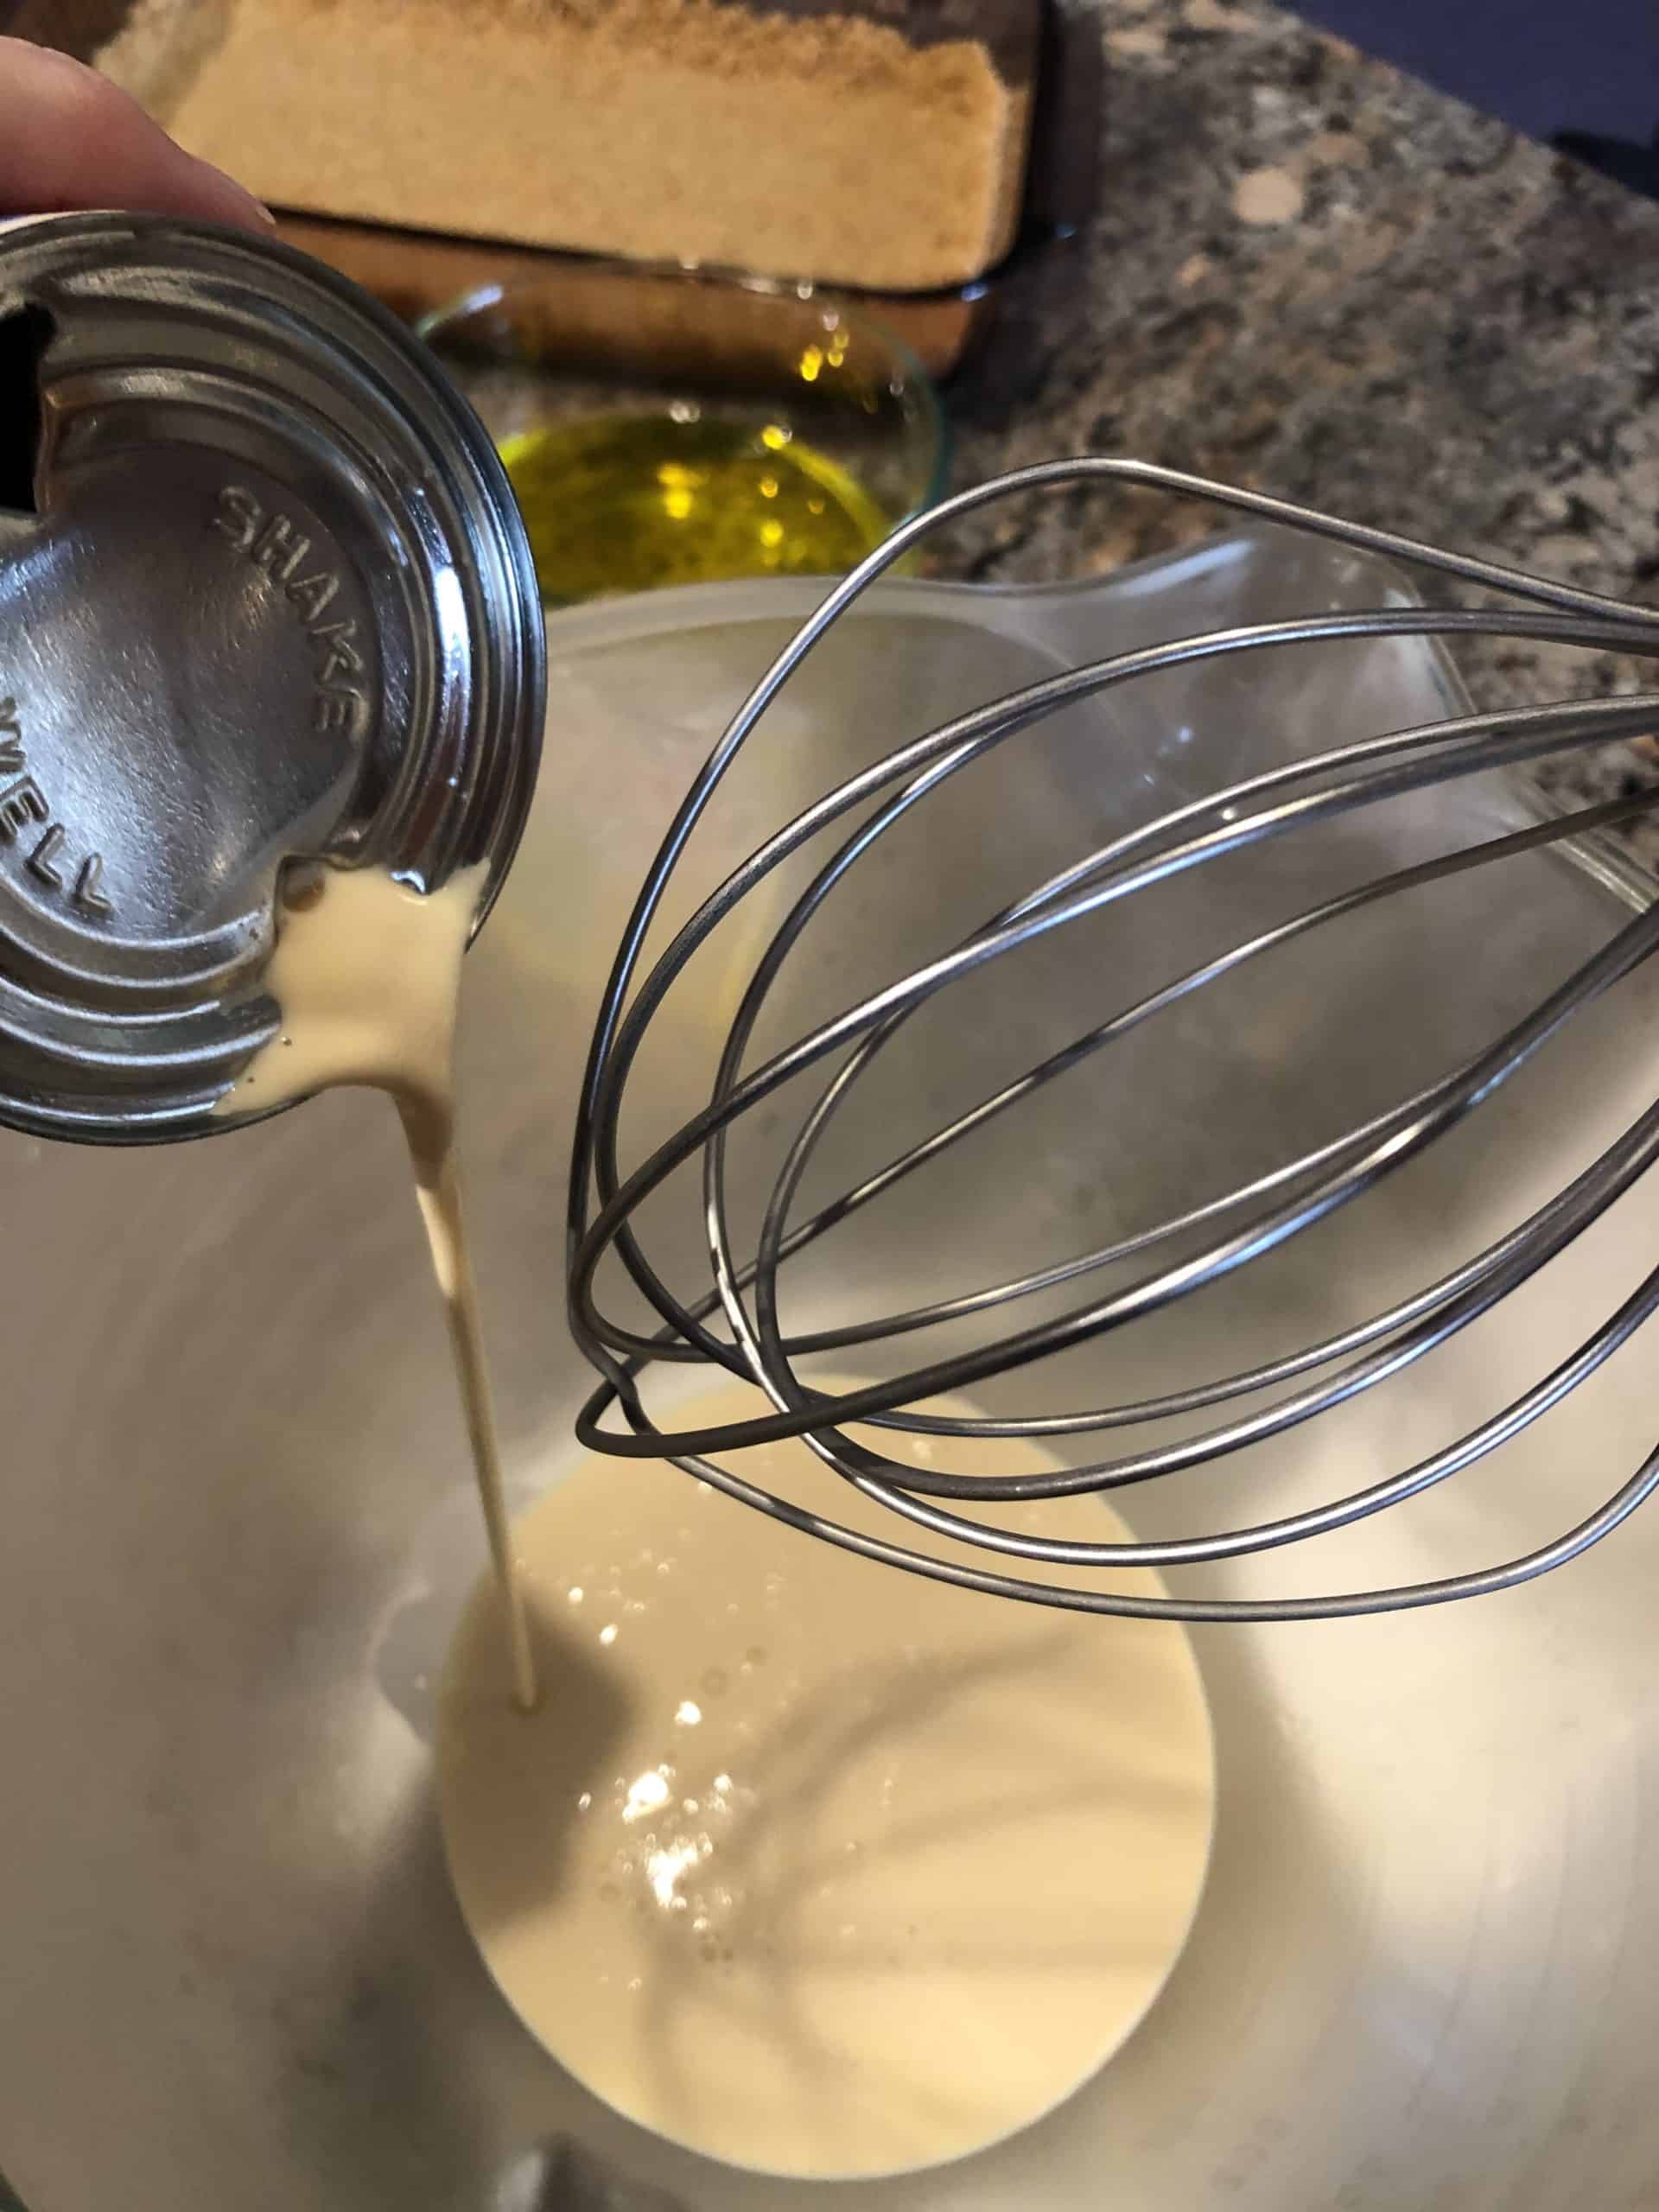 Pouring Evaporated Milk into the Chilled Mixing Bowl